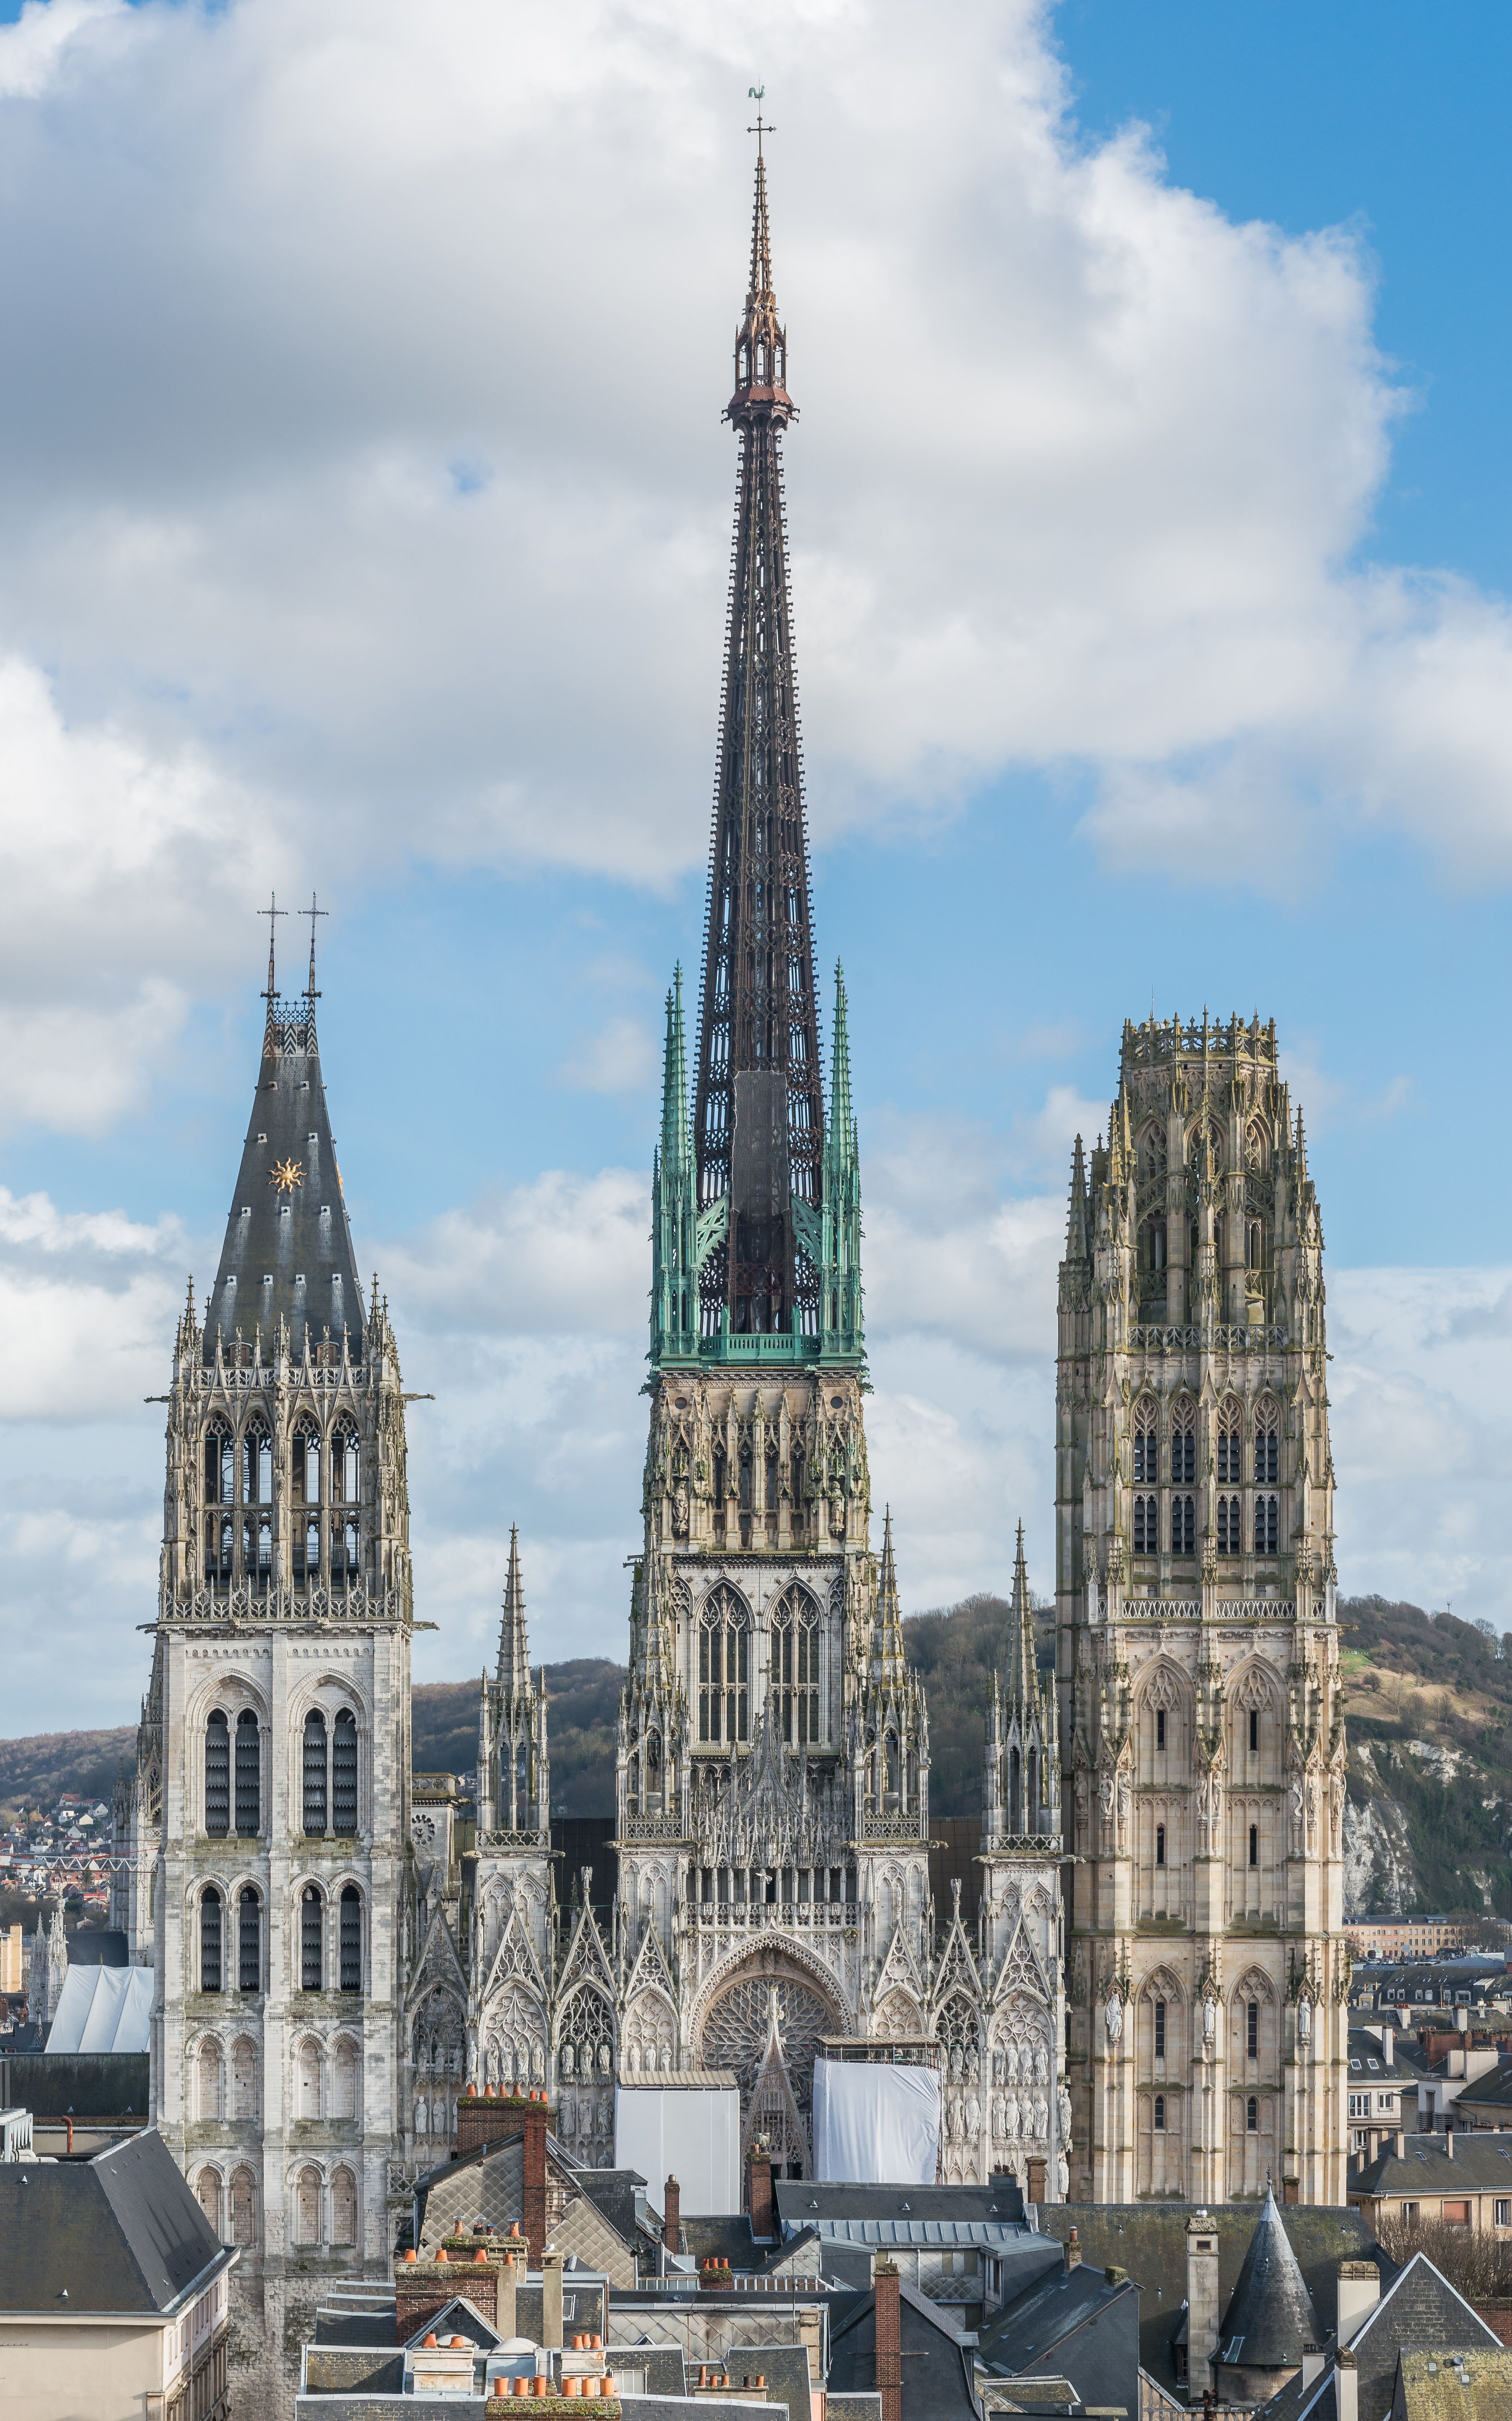 Rouen Cathedral as seen from Gros Horloge